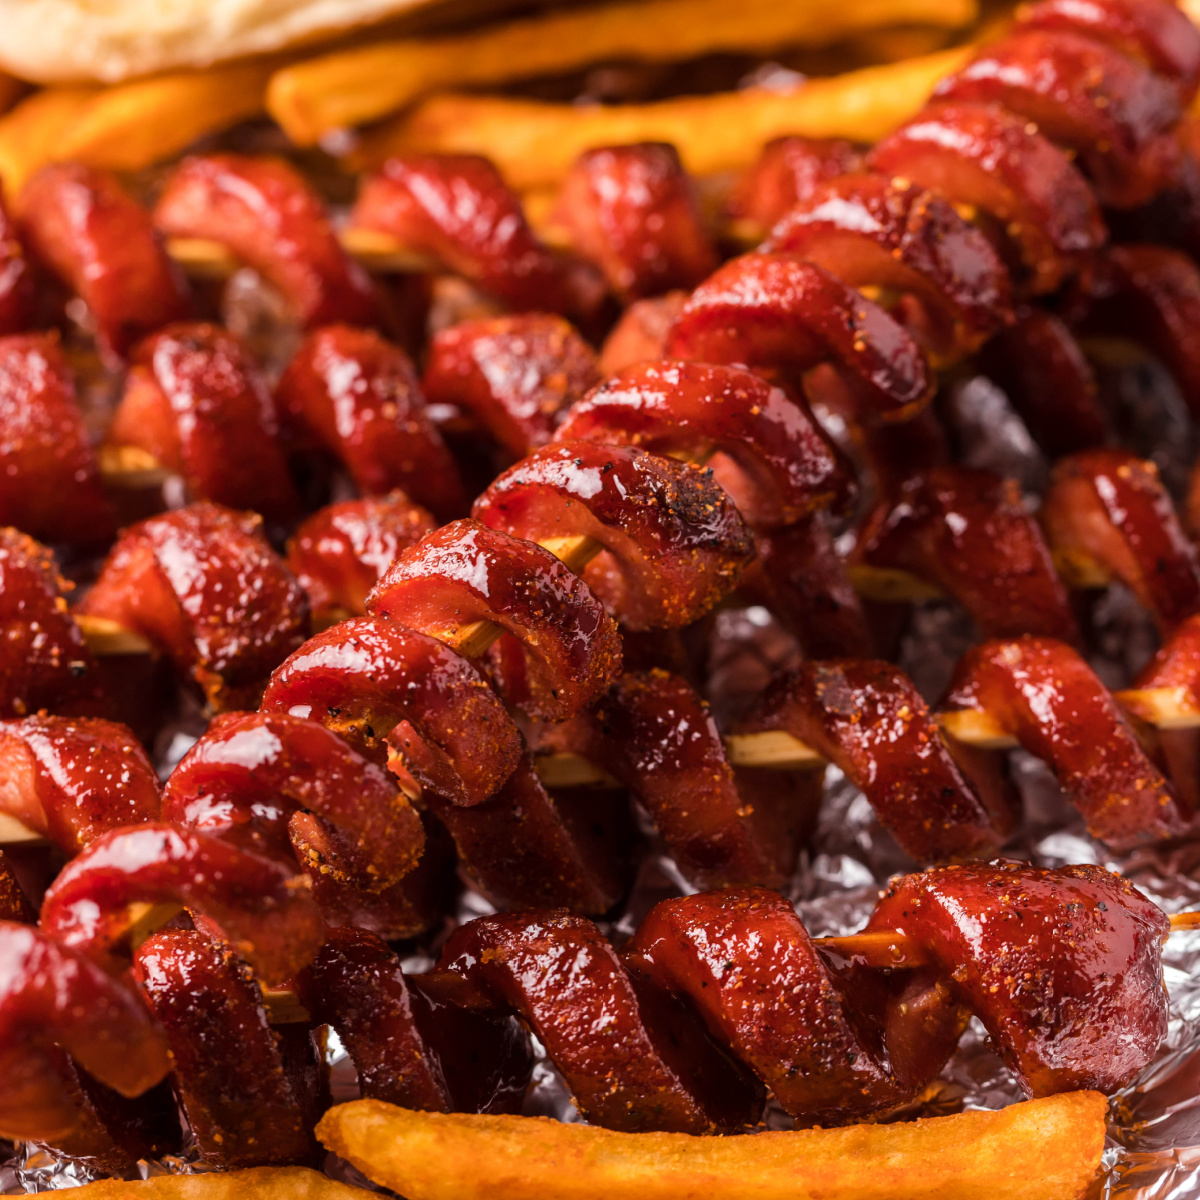 Smoked hot dogs spiraled on wooden skewers.